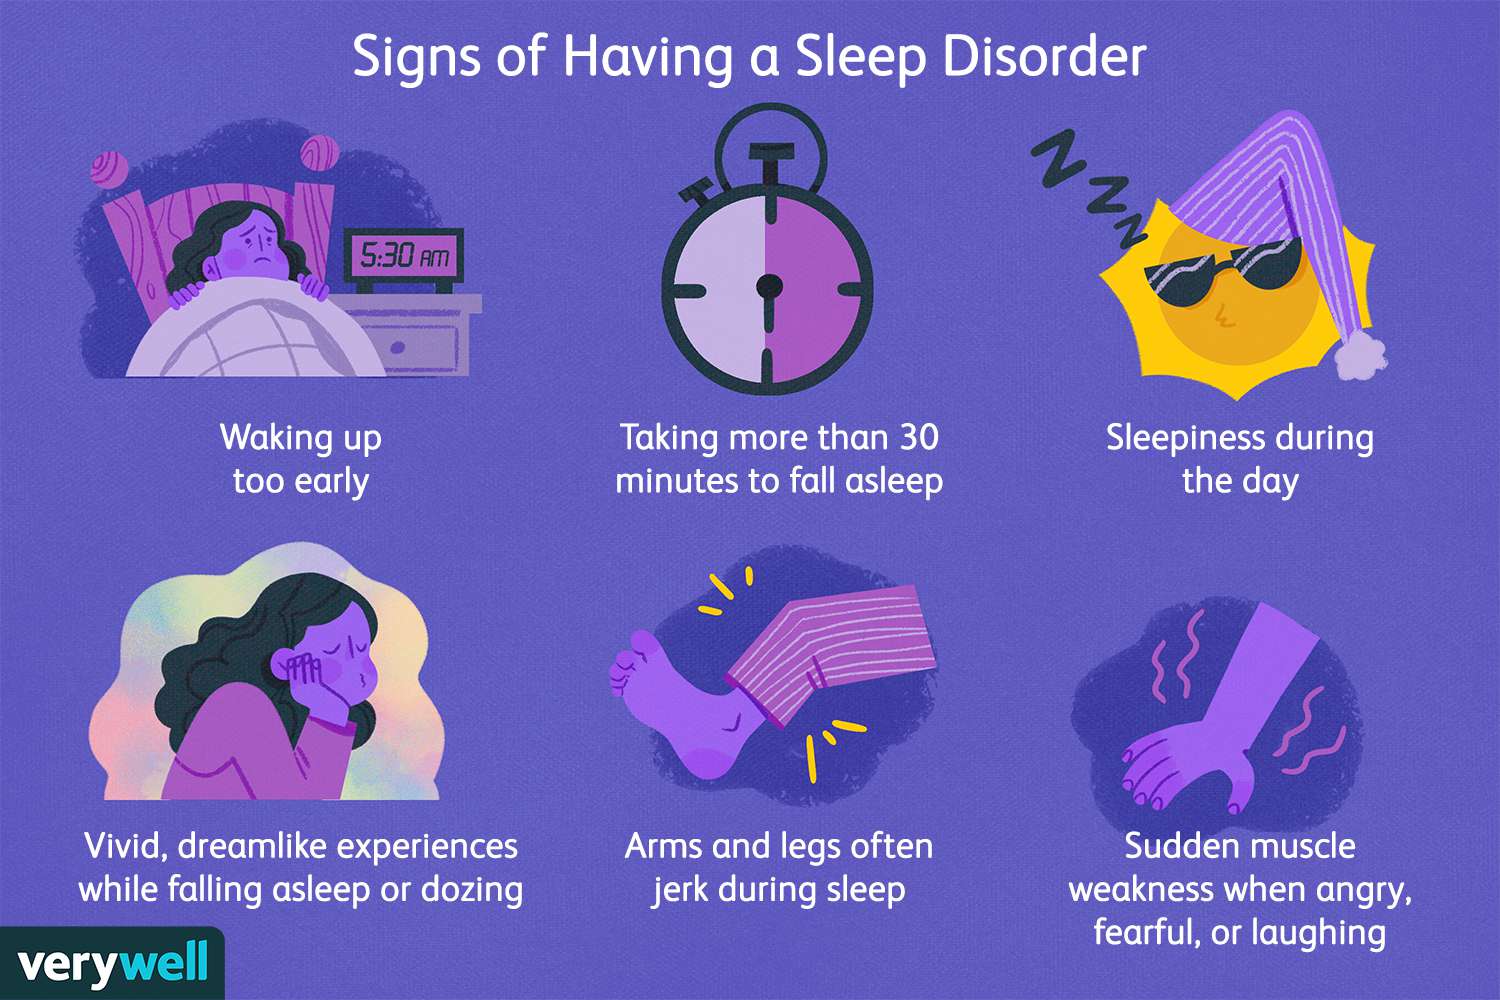 Can sleep disorders be related to other medical conditions?